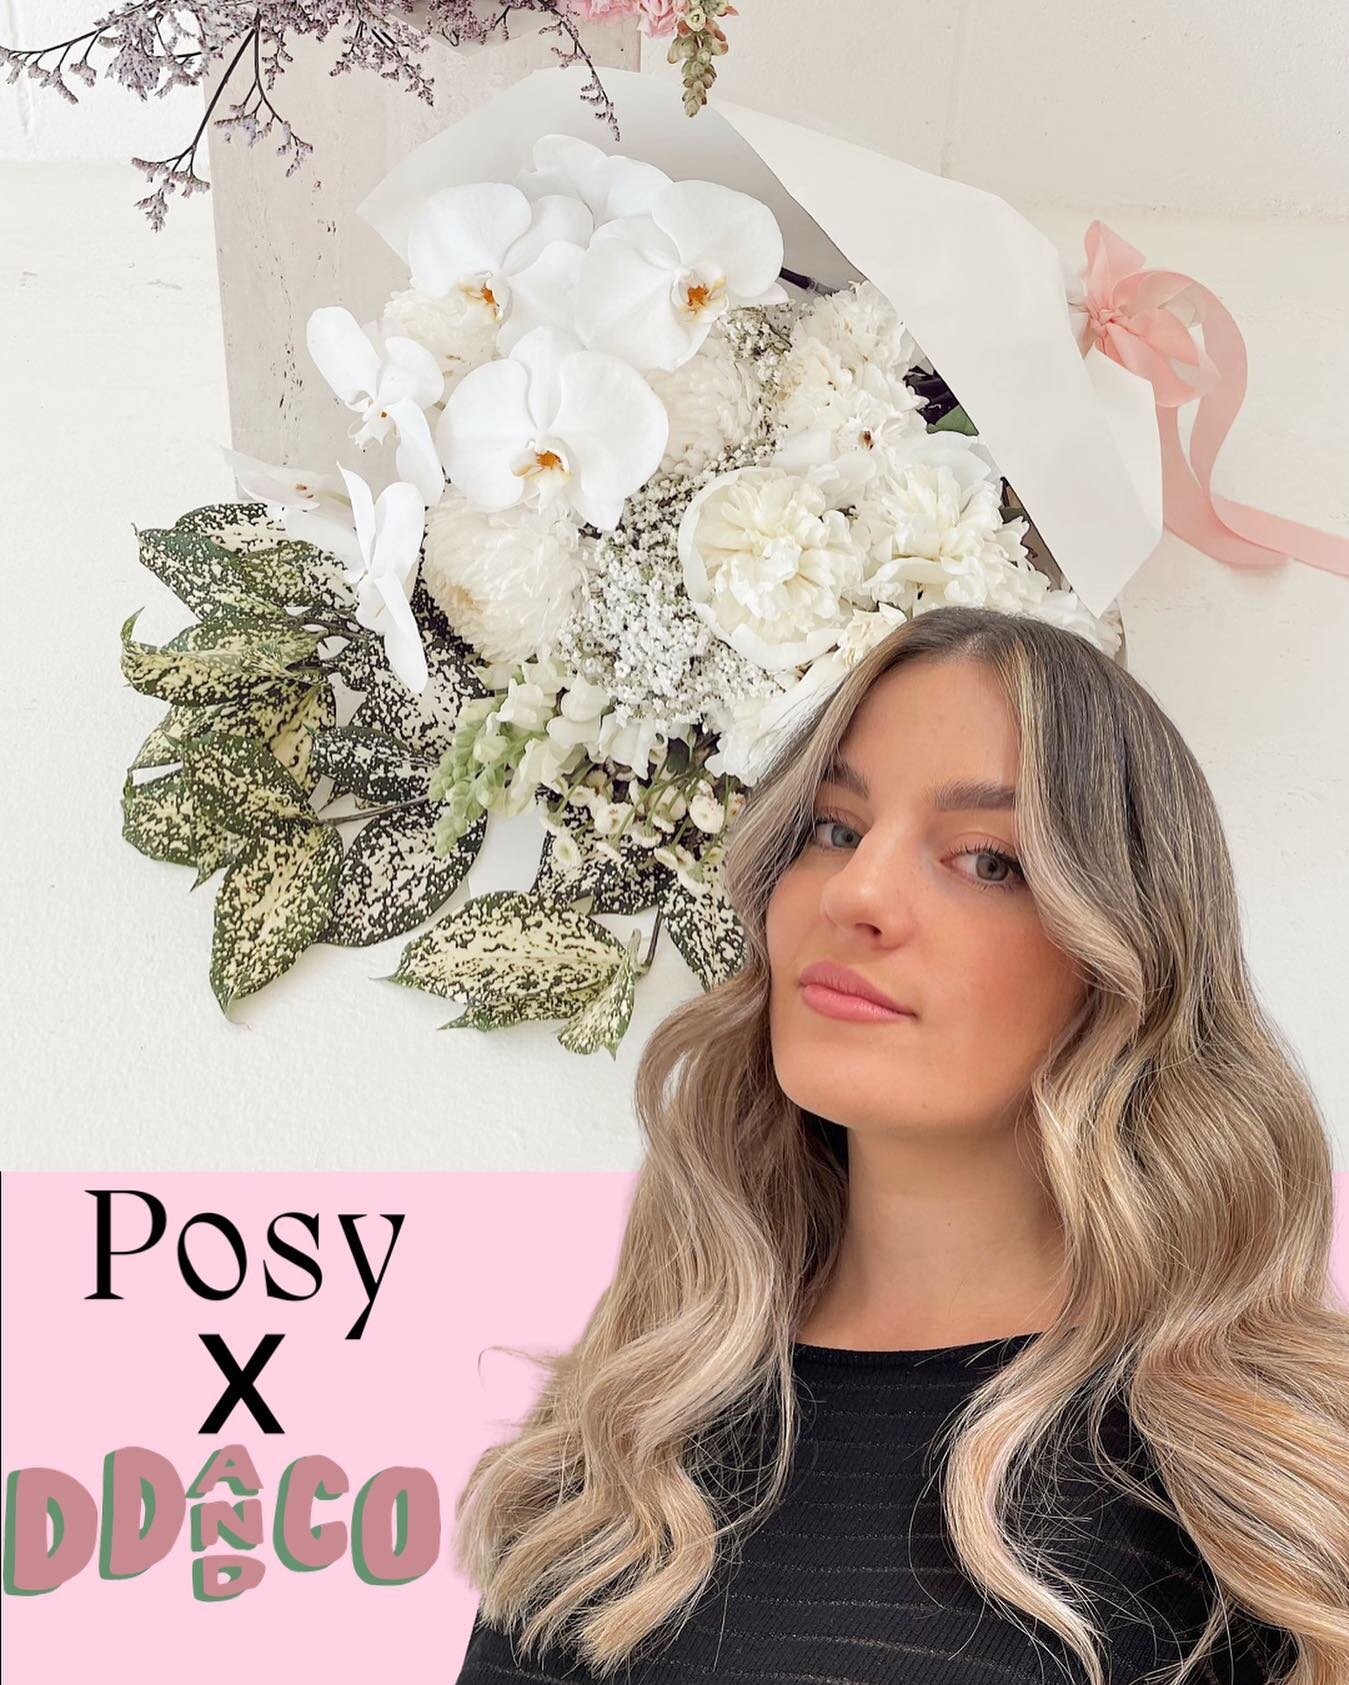 🌸HELLO $1k GIVEAWAY🌸
We have teamed up with our besties from @posysupplyco to do give you the ultimate pamper situation! Go in the chance to WIN $500 treatment and a $500 Posy Gift voucher (split both vouchers with your bestie!) &bull; Tag your fri